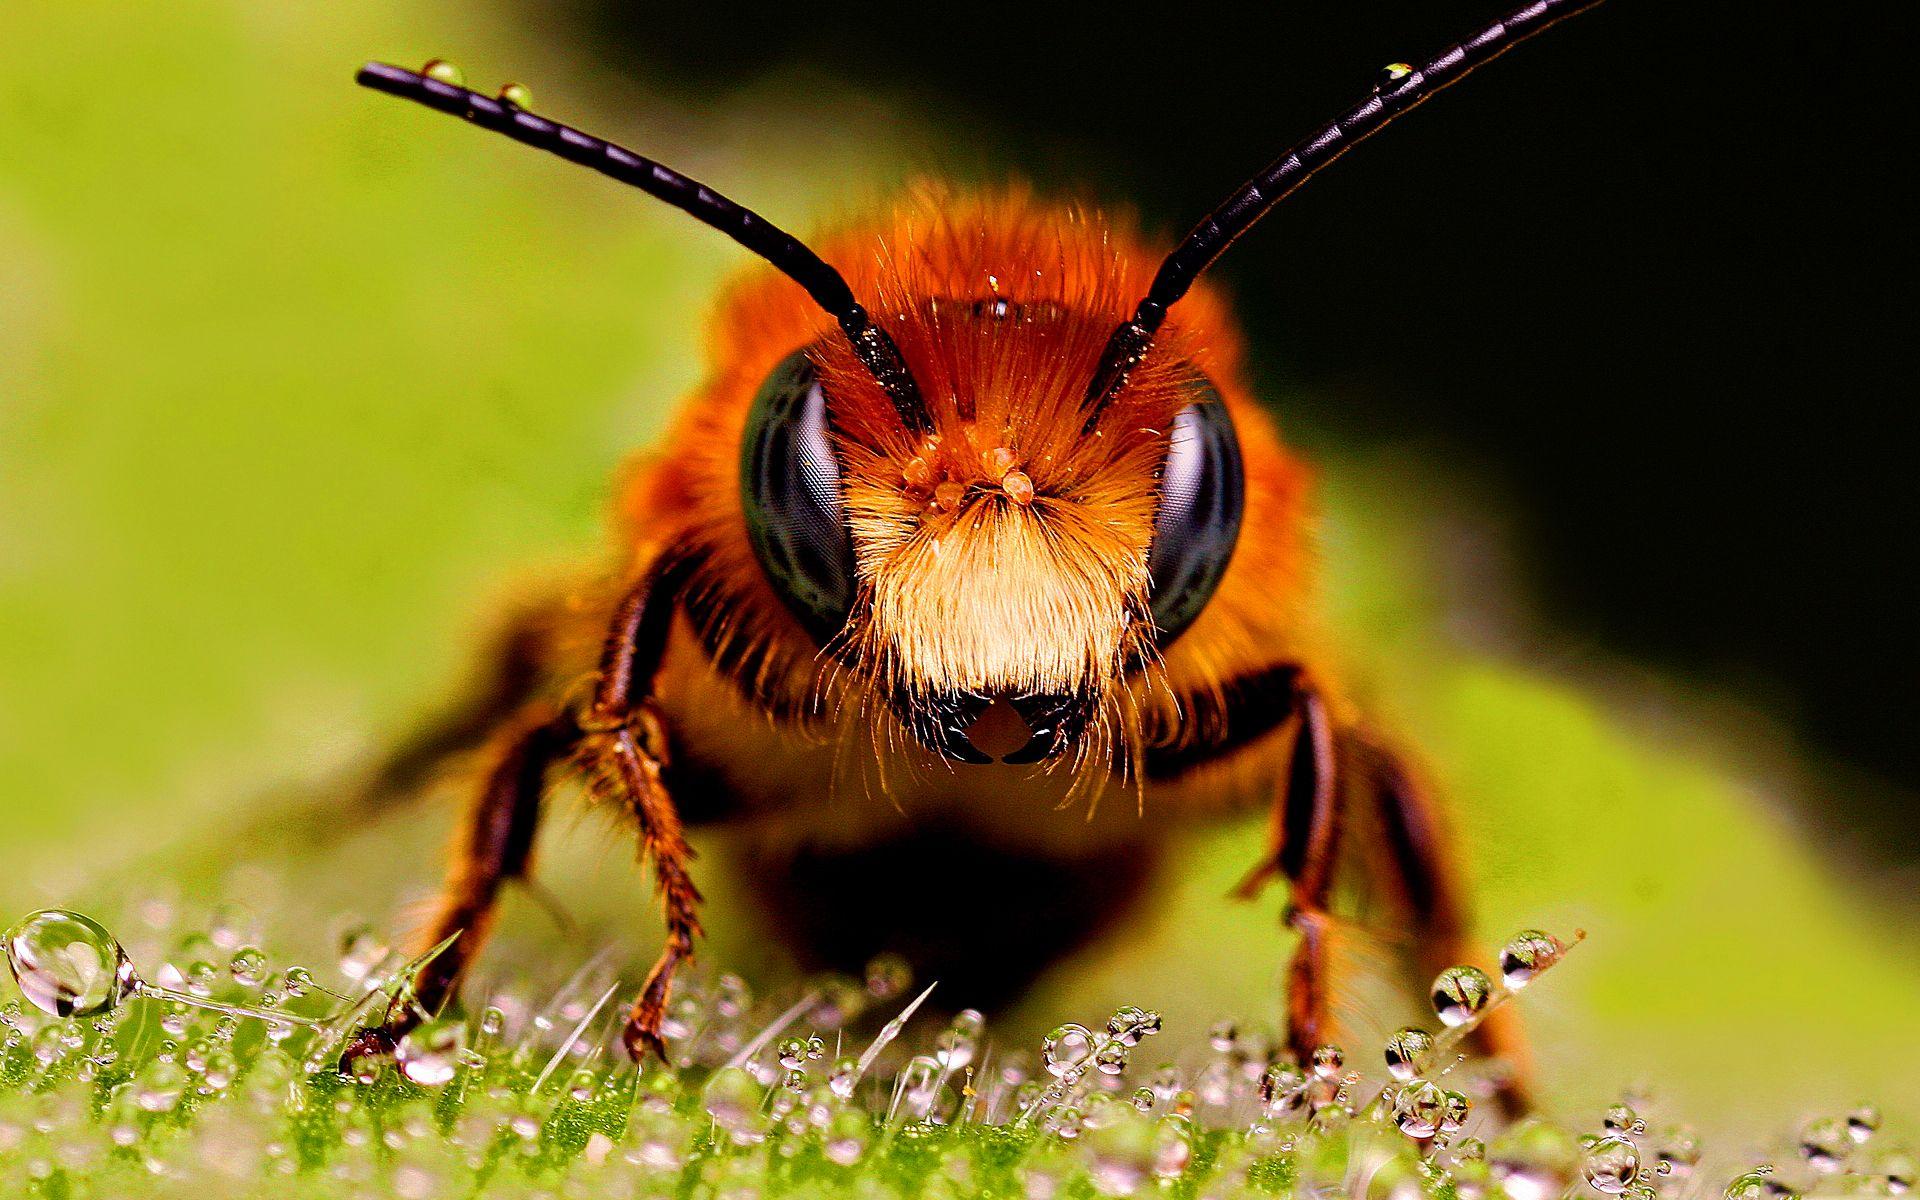 Latest Bee HD Wallpaper Image And Photo Free Download